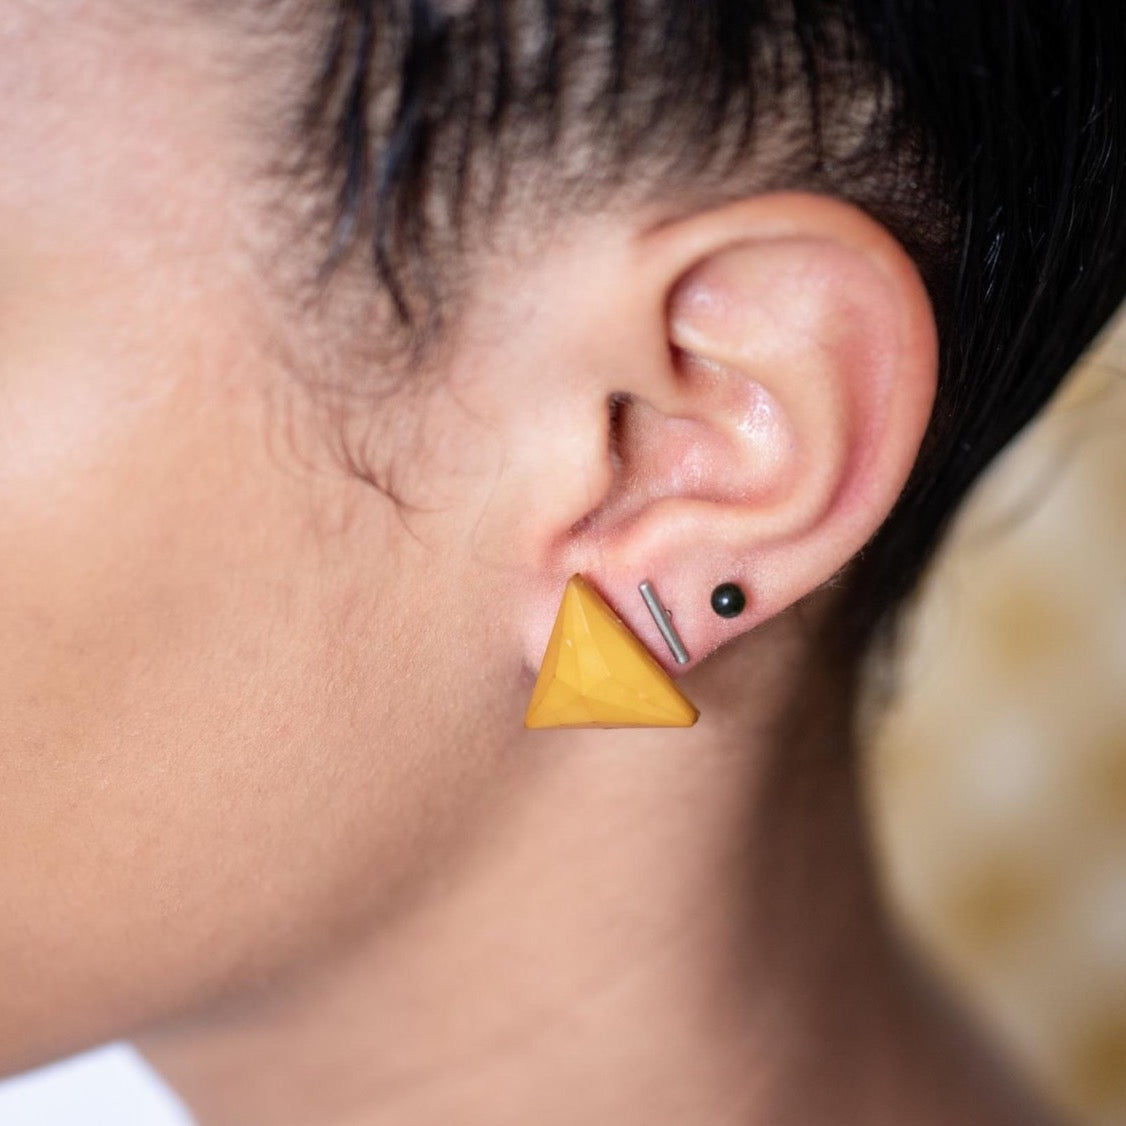 White Faceted Triangle Stud Earrings